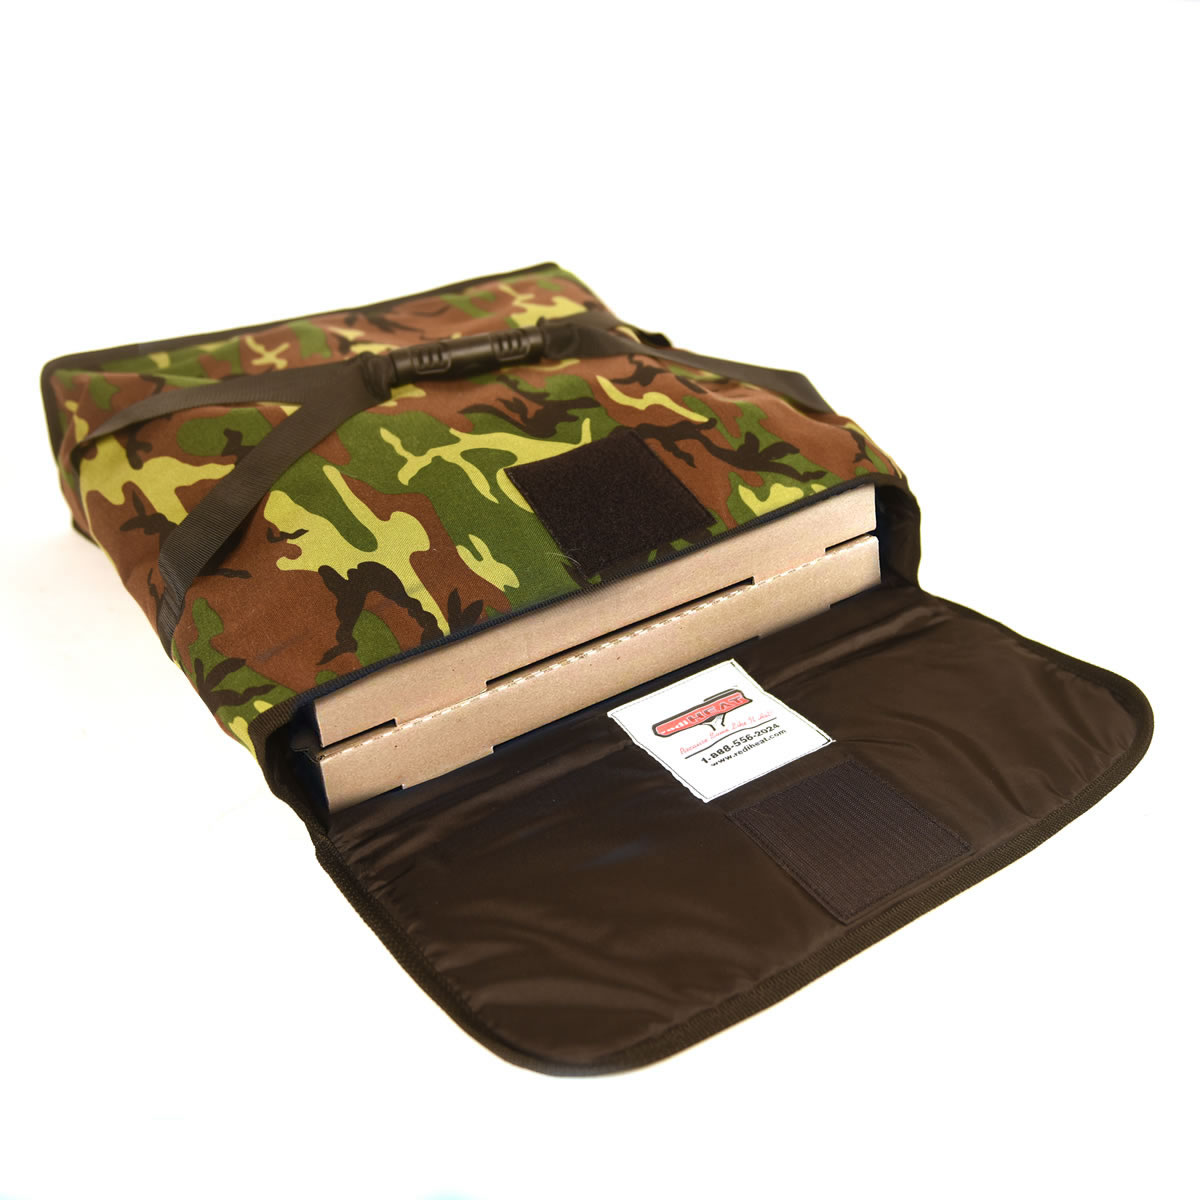 Thermal Delivery Bags for Food Heated 2 Pie Camo Bag